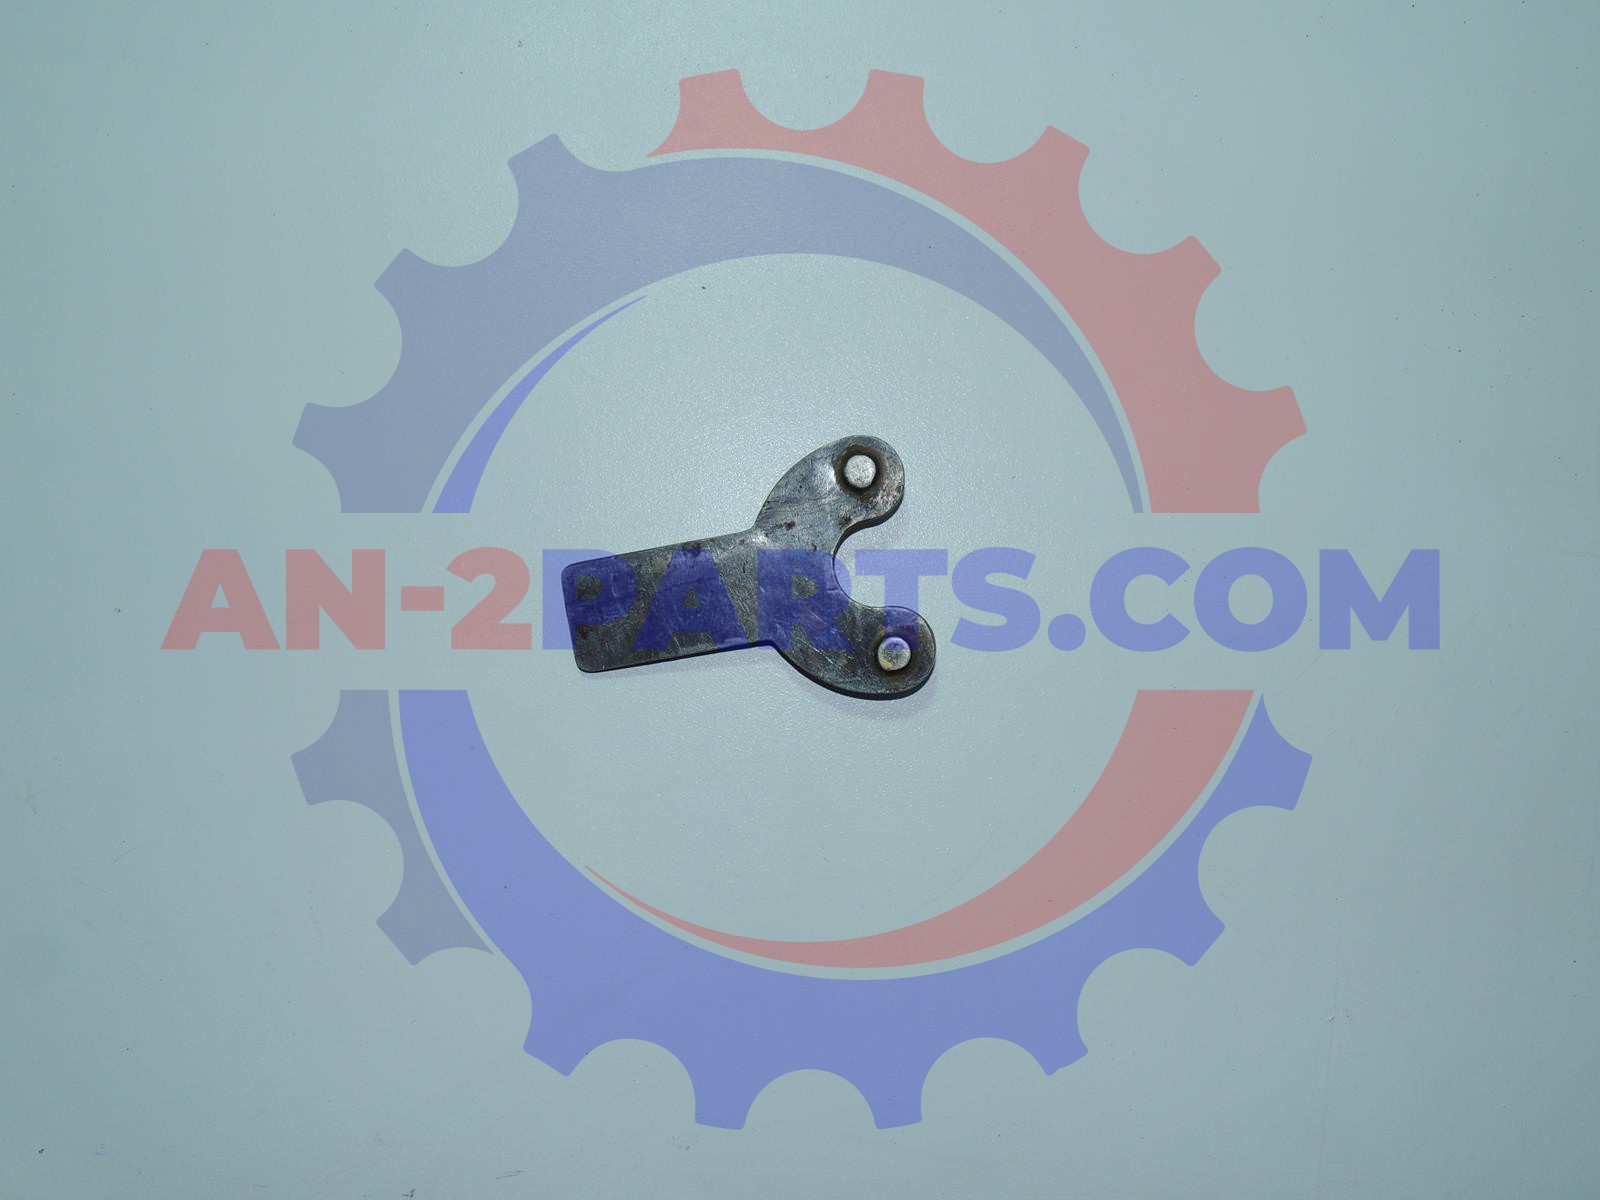 Spanner for element RI-191A